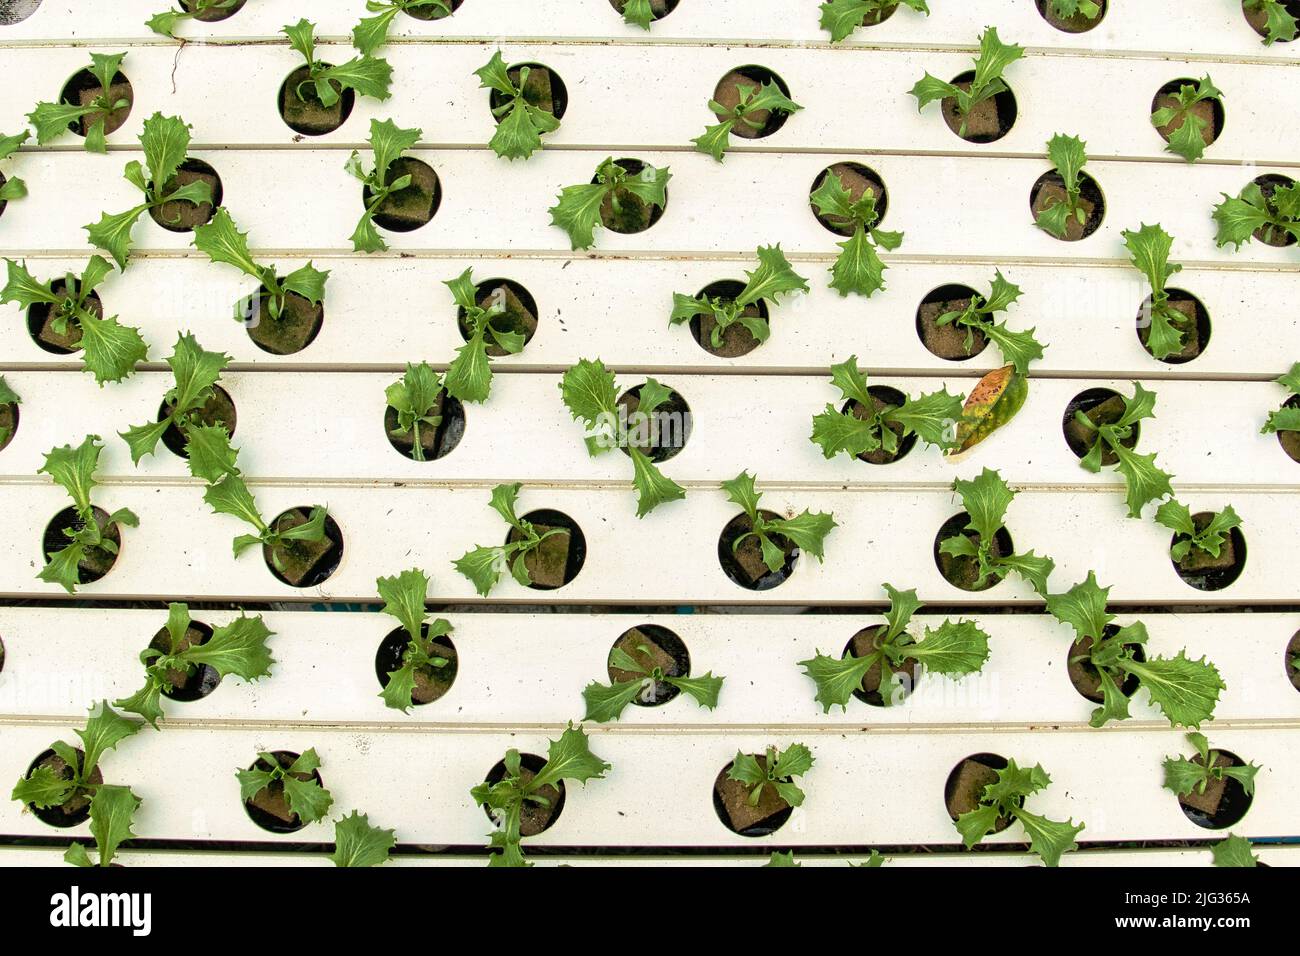 Regular pattern of hydroponically grown seedlings of organic lettuce.Tiny lettuce plants growing out of holes in plastic tubes. Stock Photo